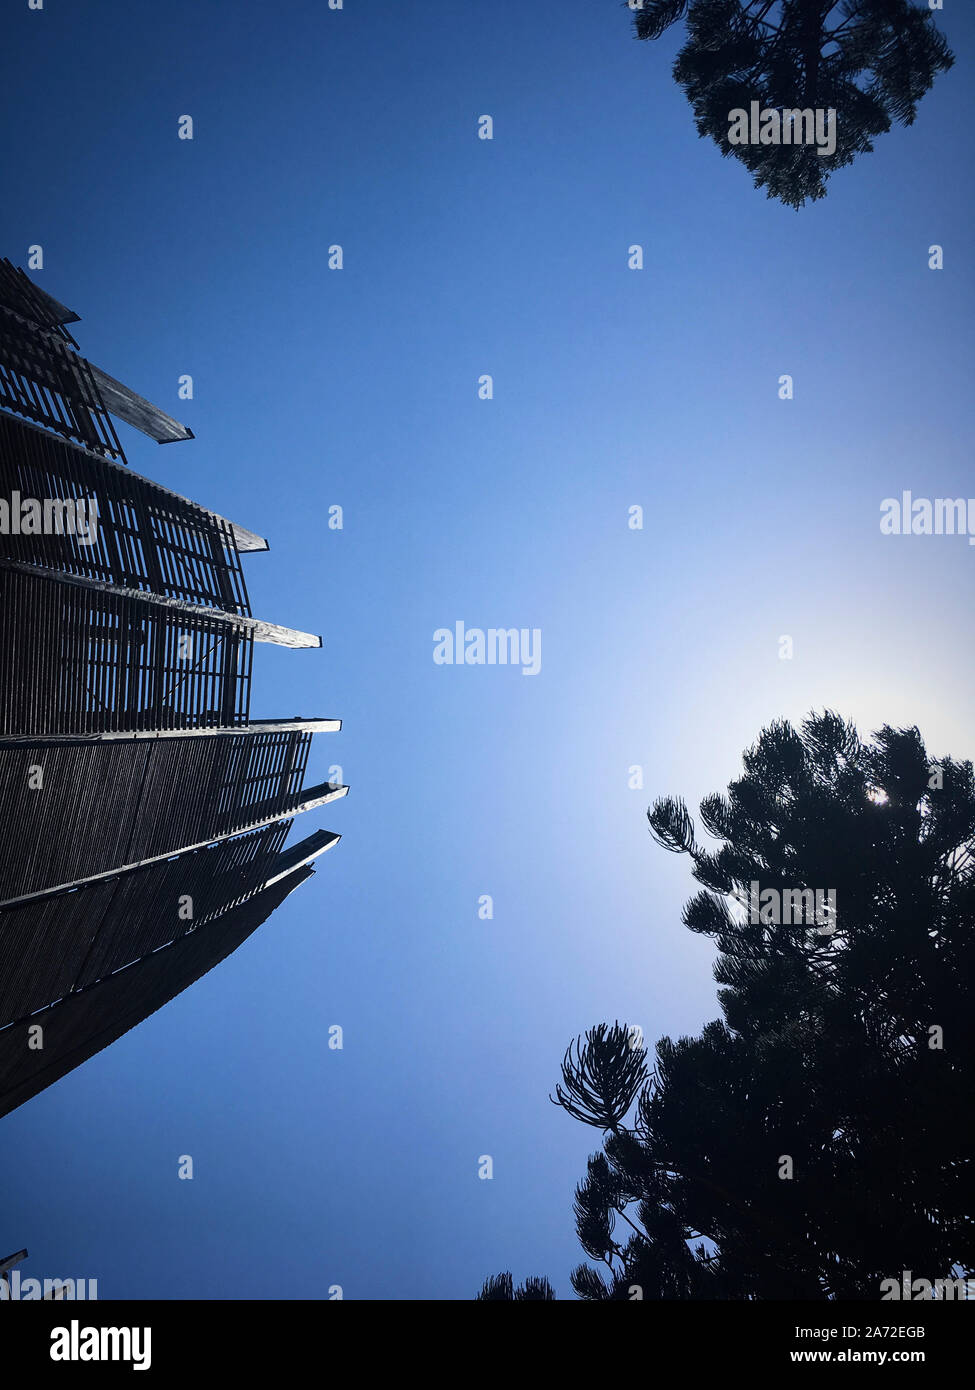 A stunning hut peak of part of the Jean-Marie Tjibaou Cultural Centre designed by Renzo Piano. Stock Photo